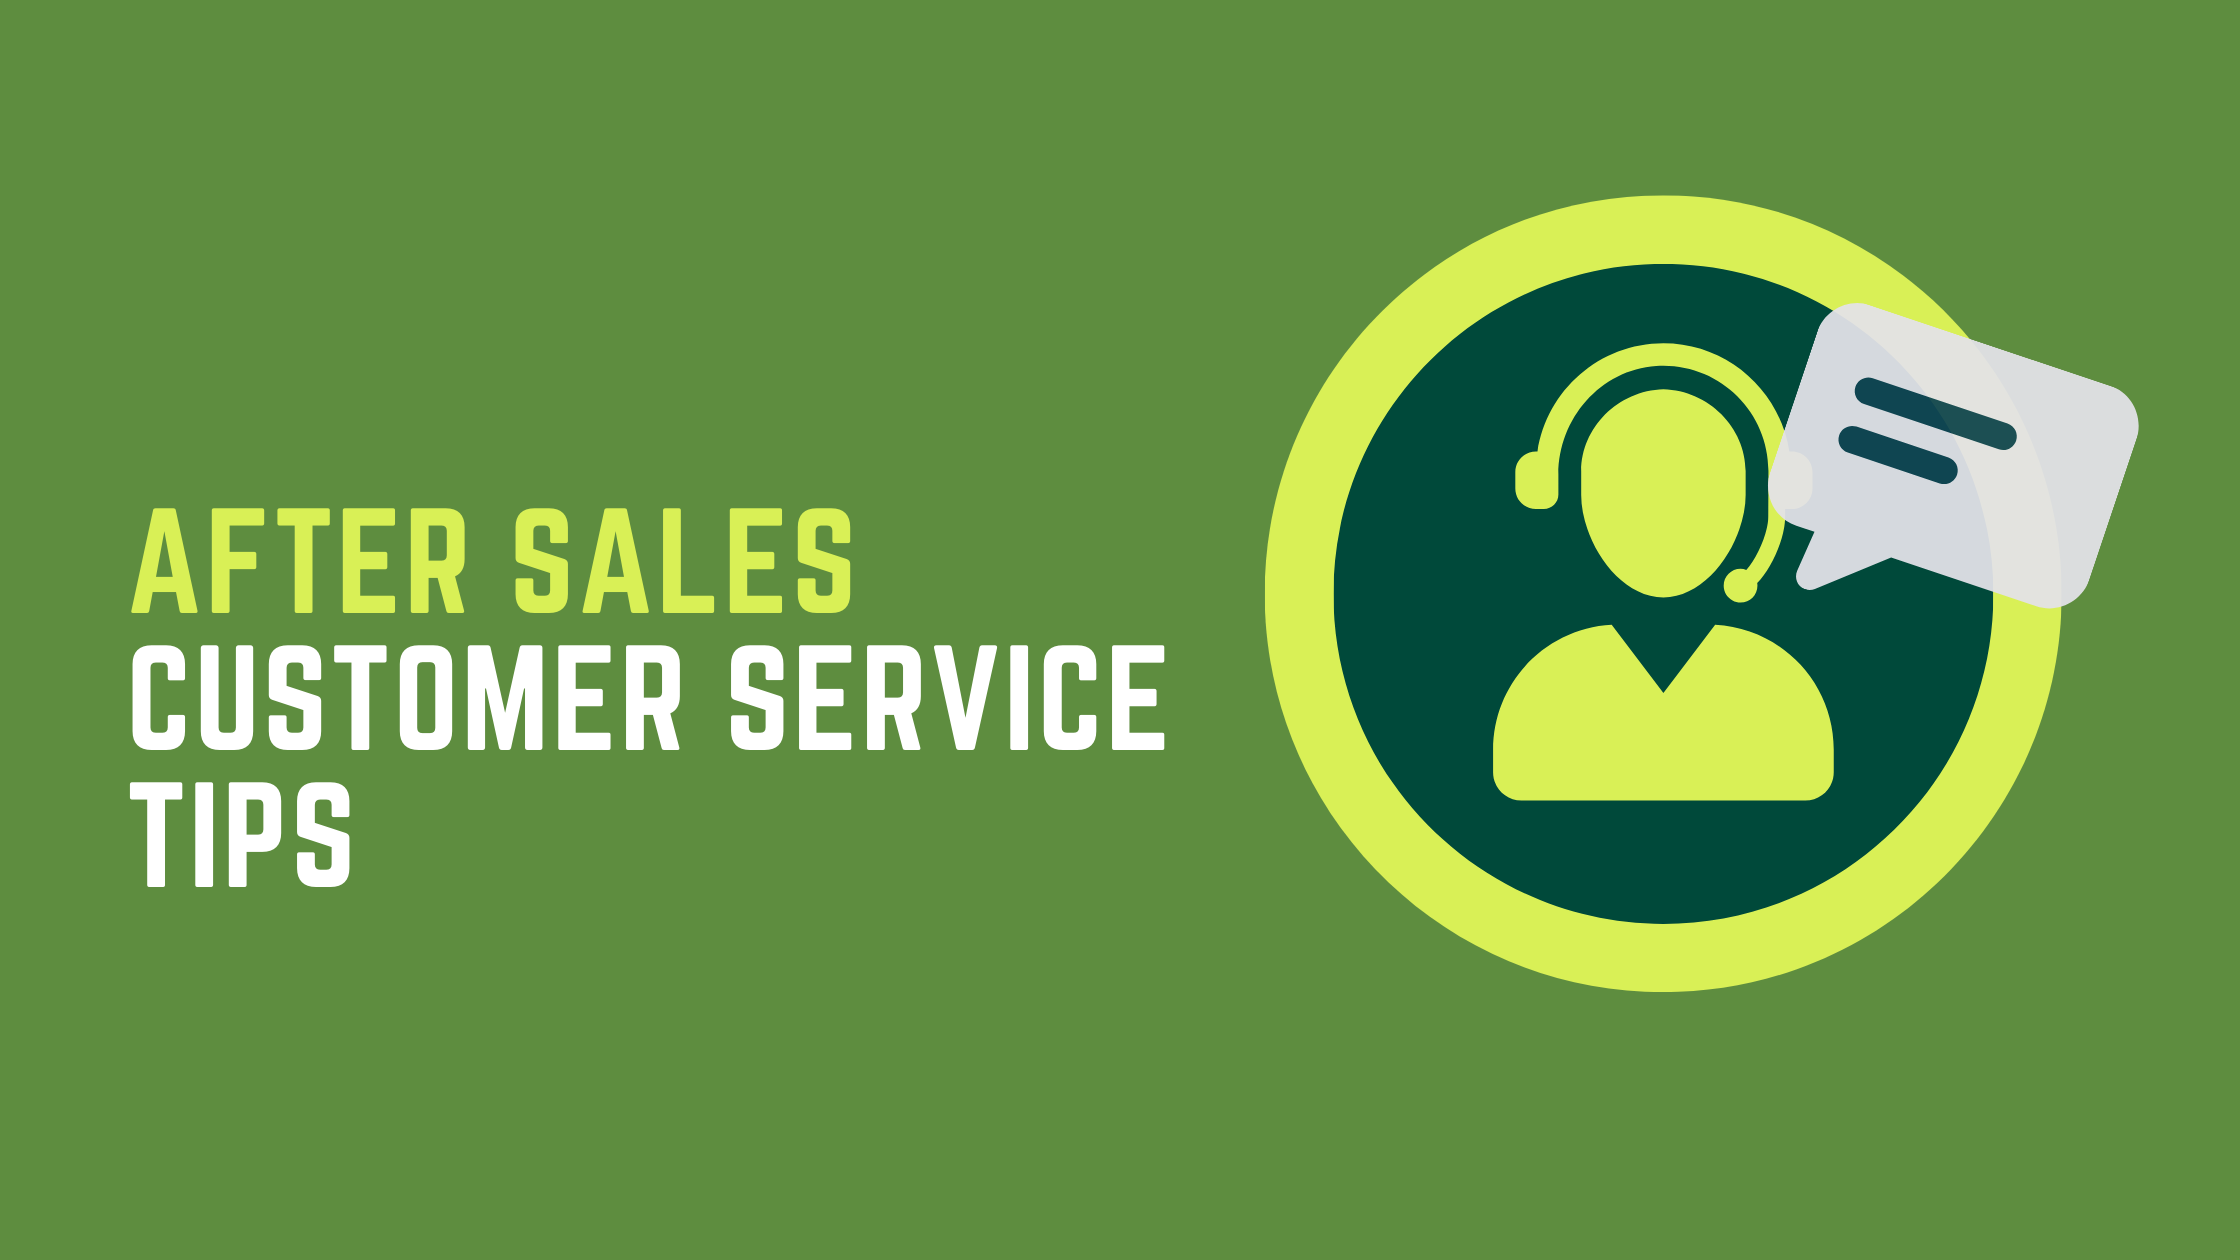 Tips for better customer service on your Shopify store after sales